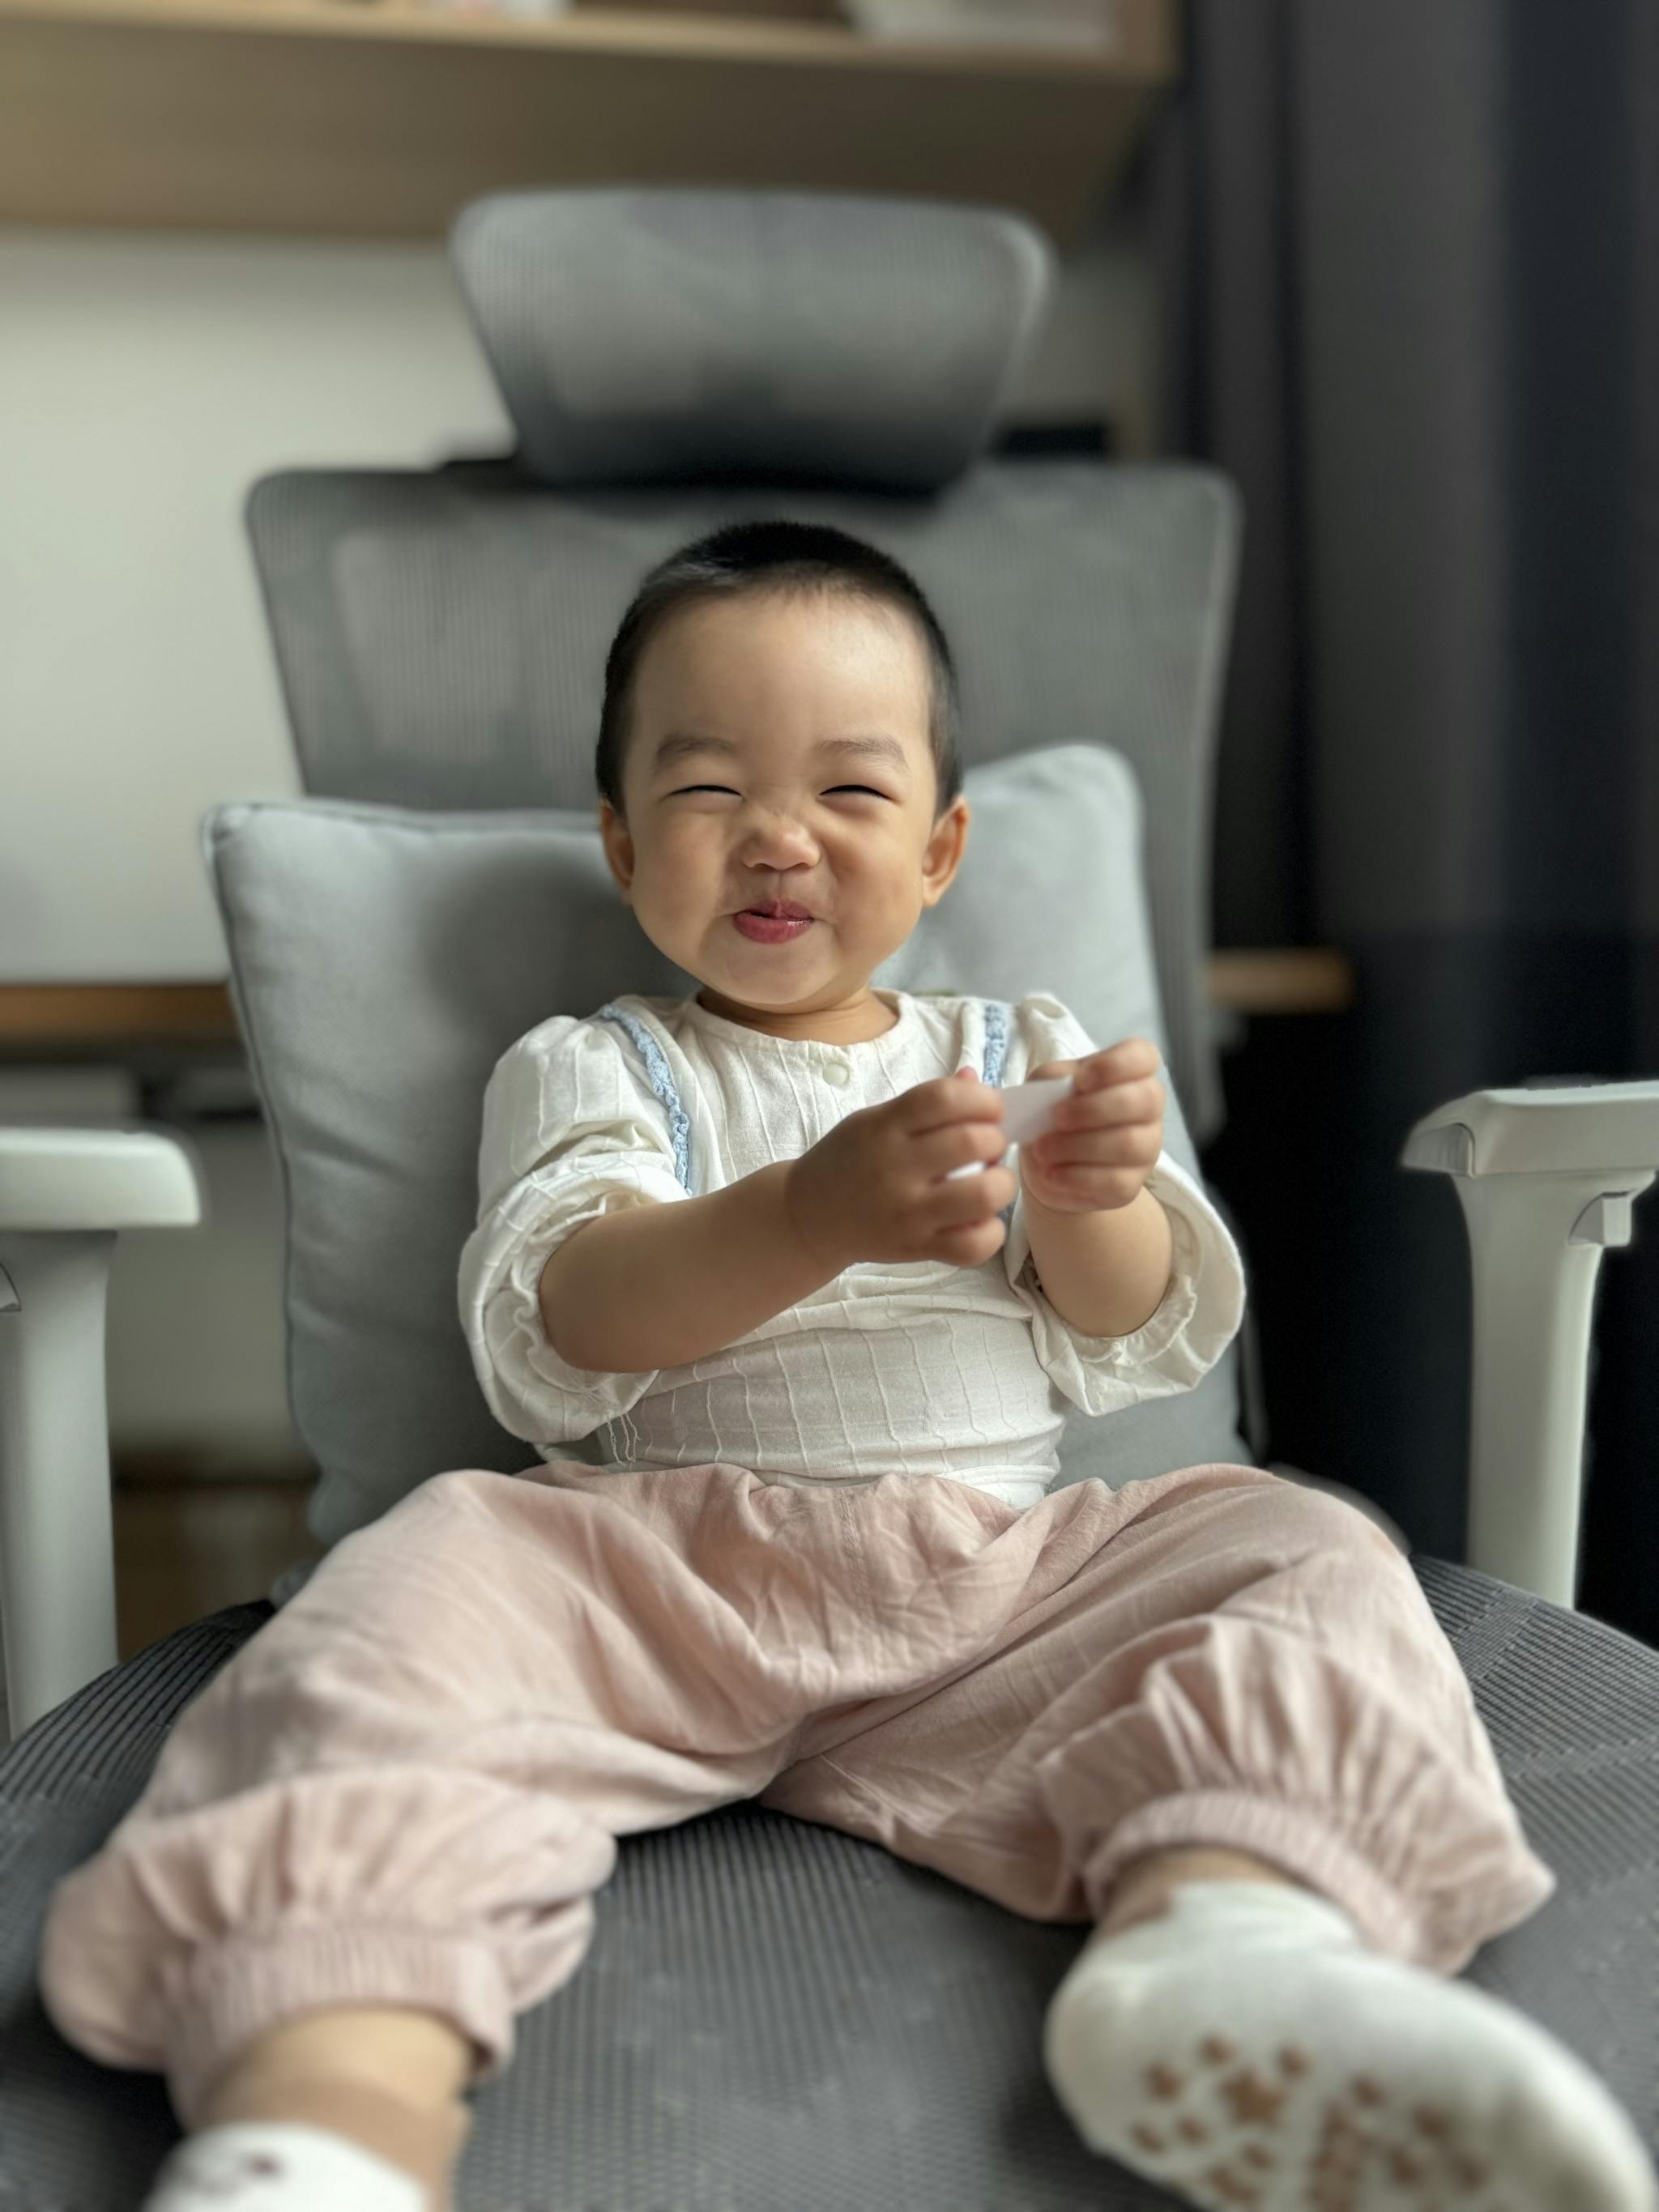 A baby with a humorous expression sits on a cushioned chair, sticking out their tongue and squinting one eye, dressed in a white top and pink pants